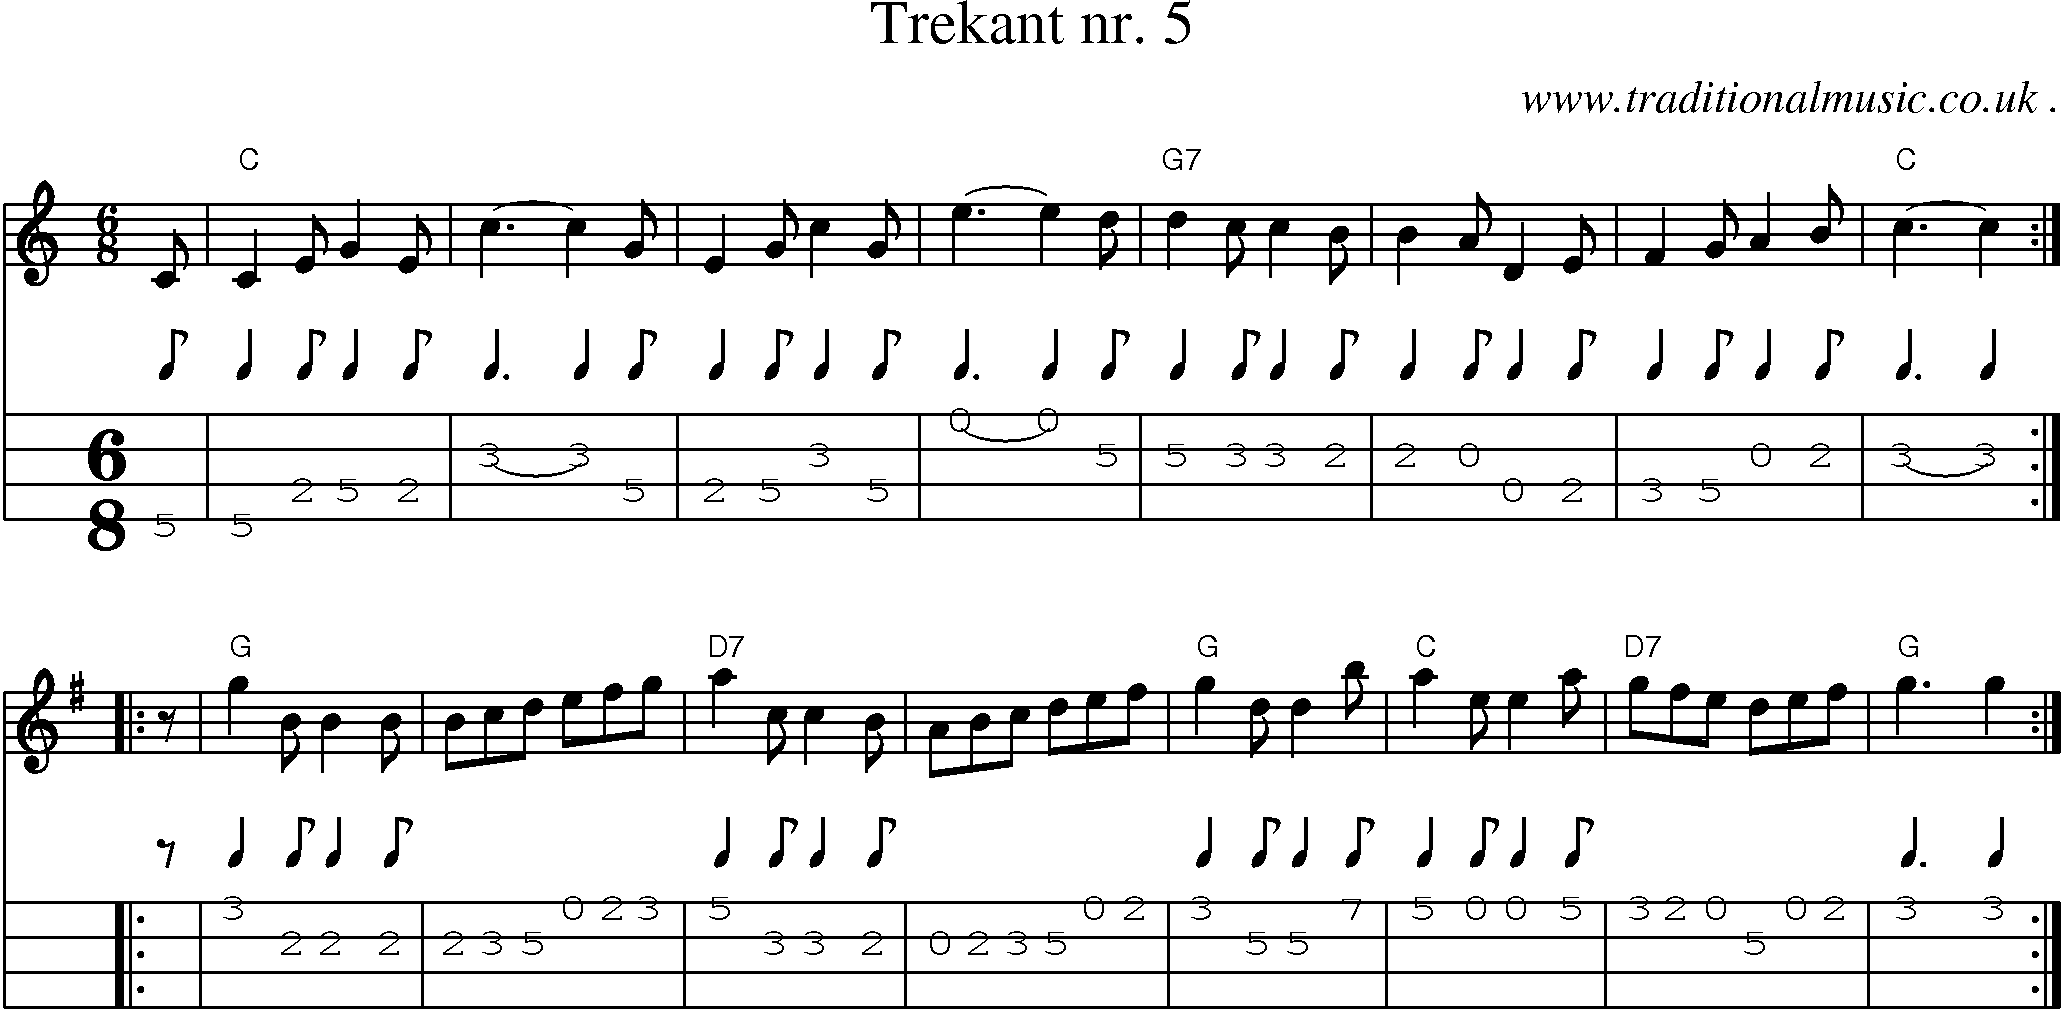 Sheet-music  score, Chords and Mandolin Tabs for Trekant Nr 5